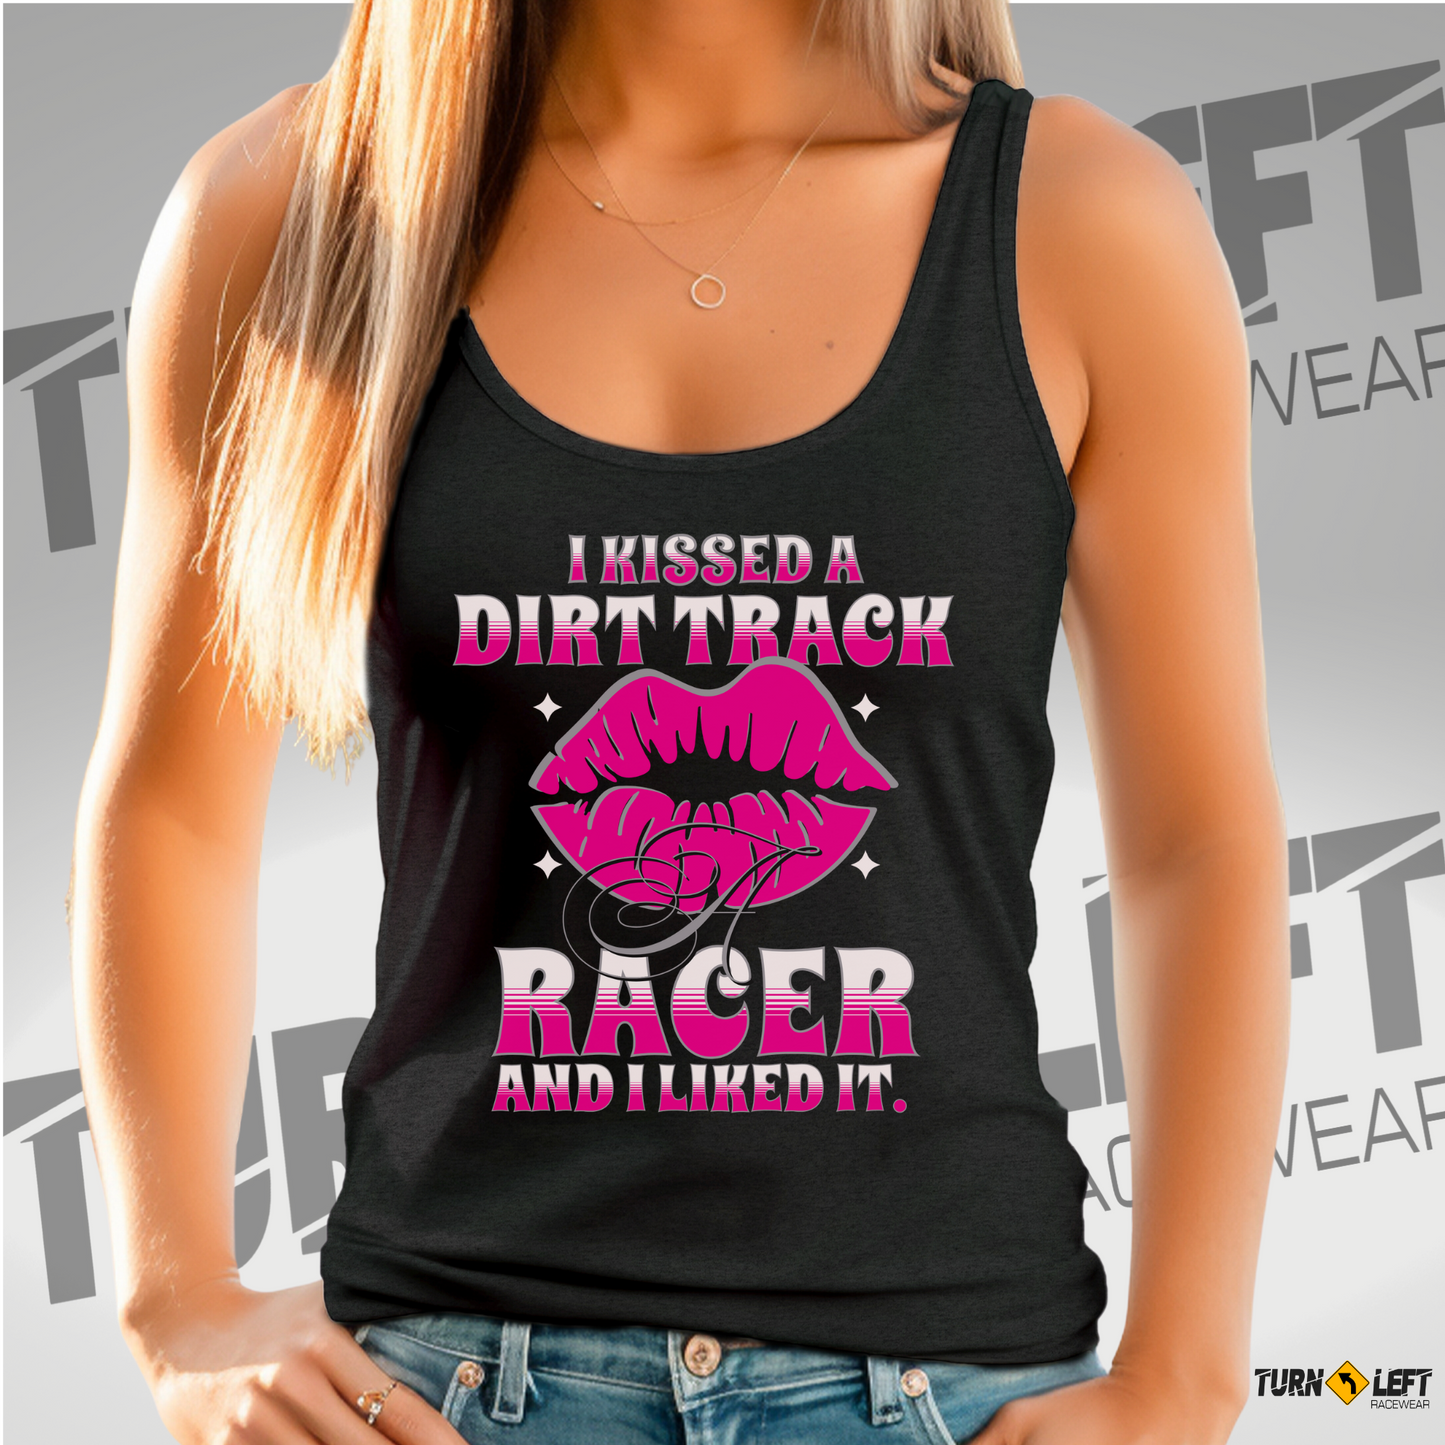 I Kissed A Dirt Track Racer And I Liked It Tank Top, Race wife shirts, Racers Girlfriend Shirts, Dirt track racing shirts for women. Stock car dirt racing tops